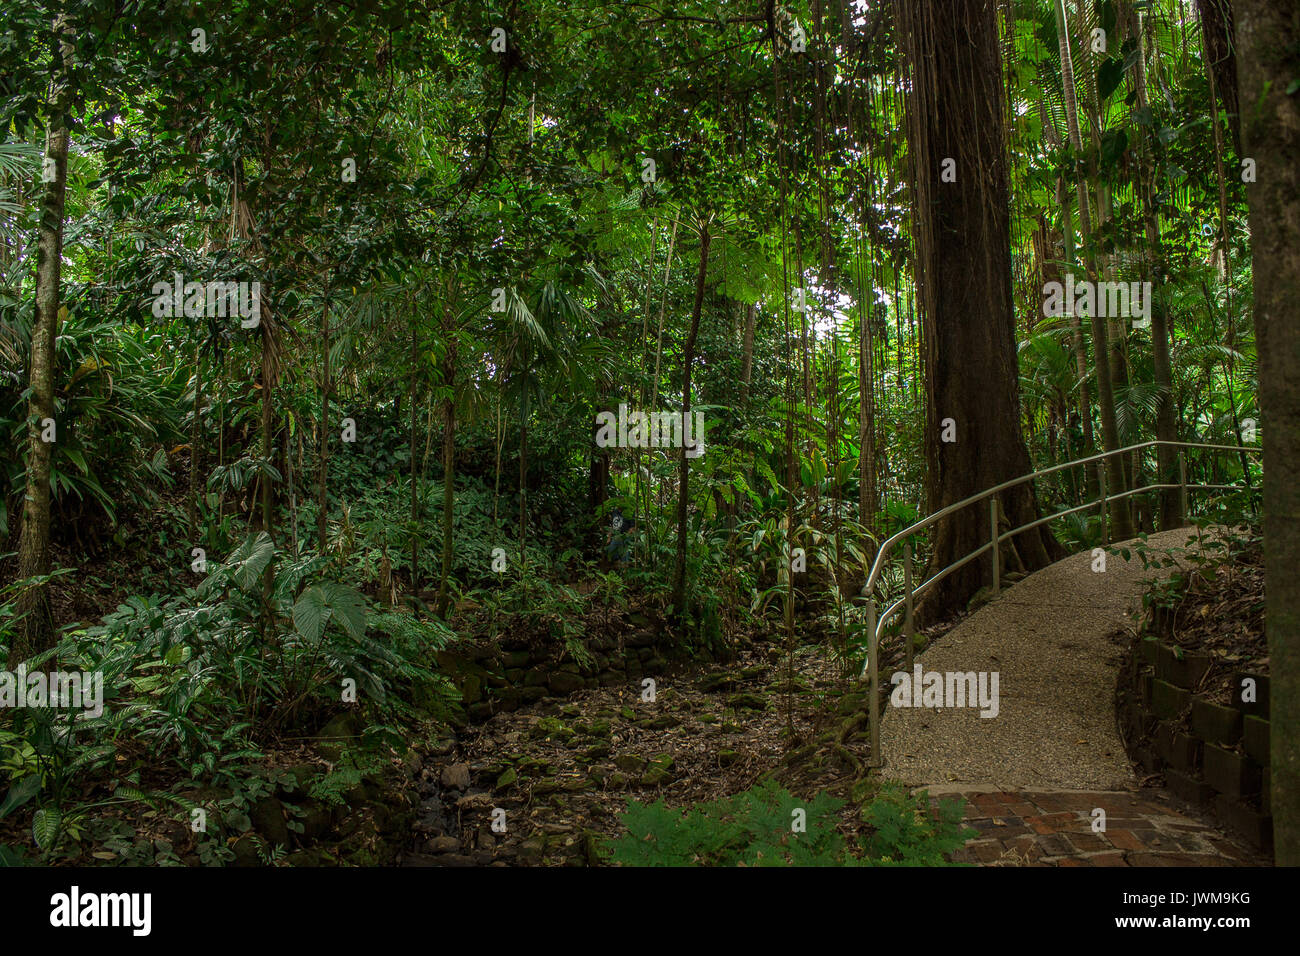 A photo of deep forest/Jungle. Stock Photo